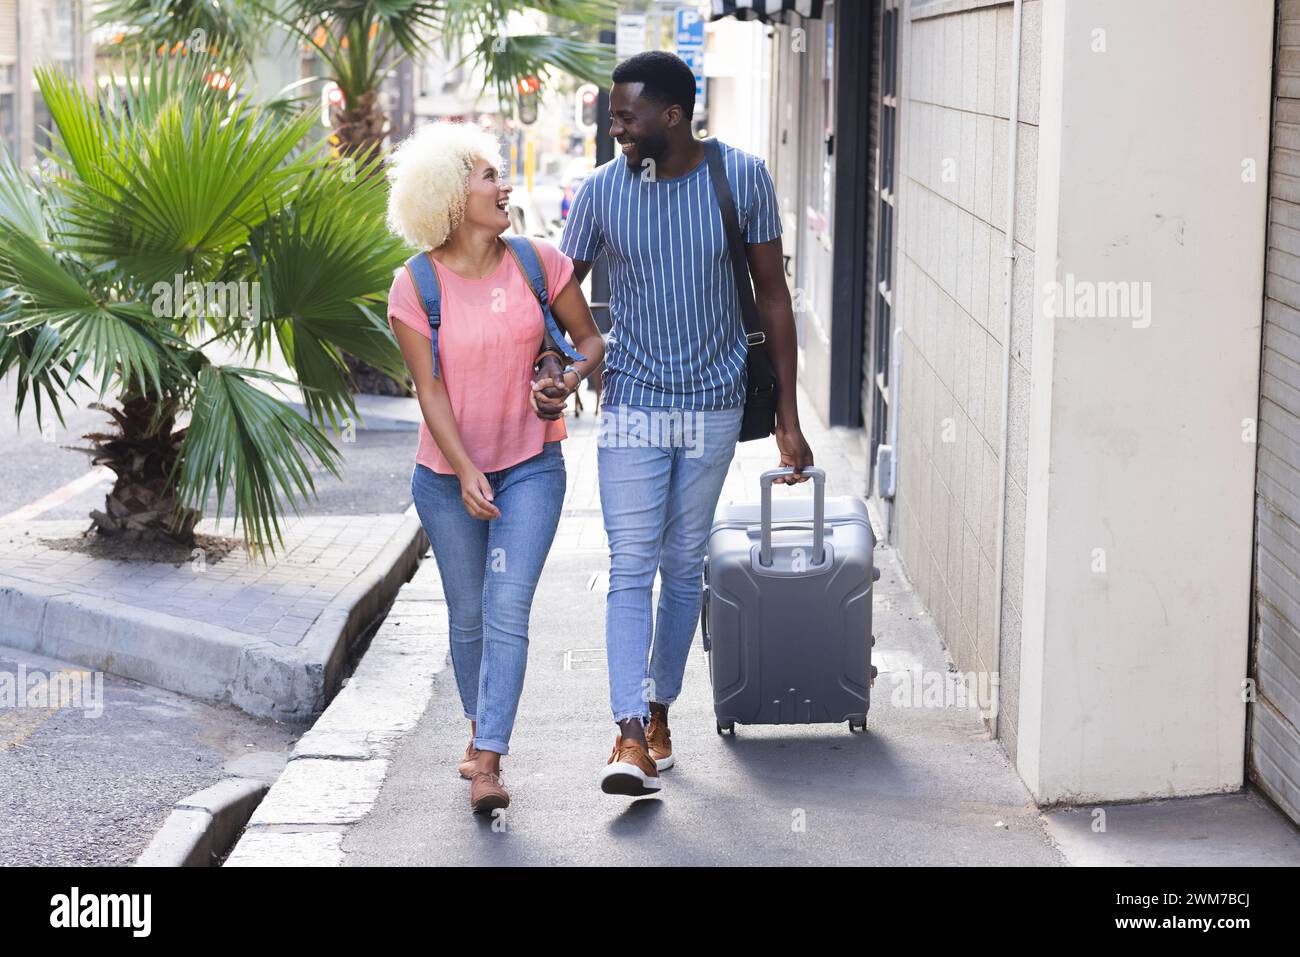 A young diverse biracial couple walks together in a city carrying luggage on vacation Stock Photo